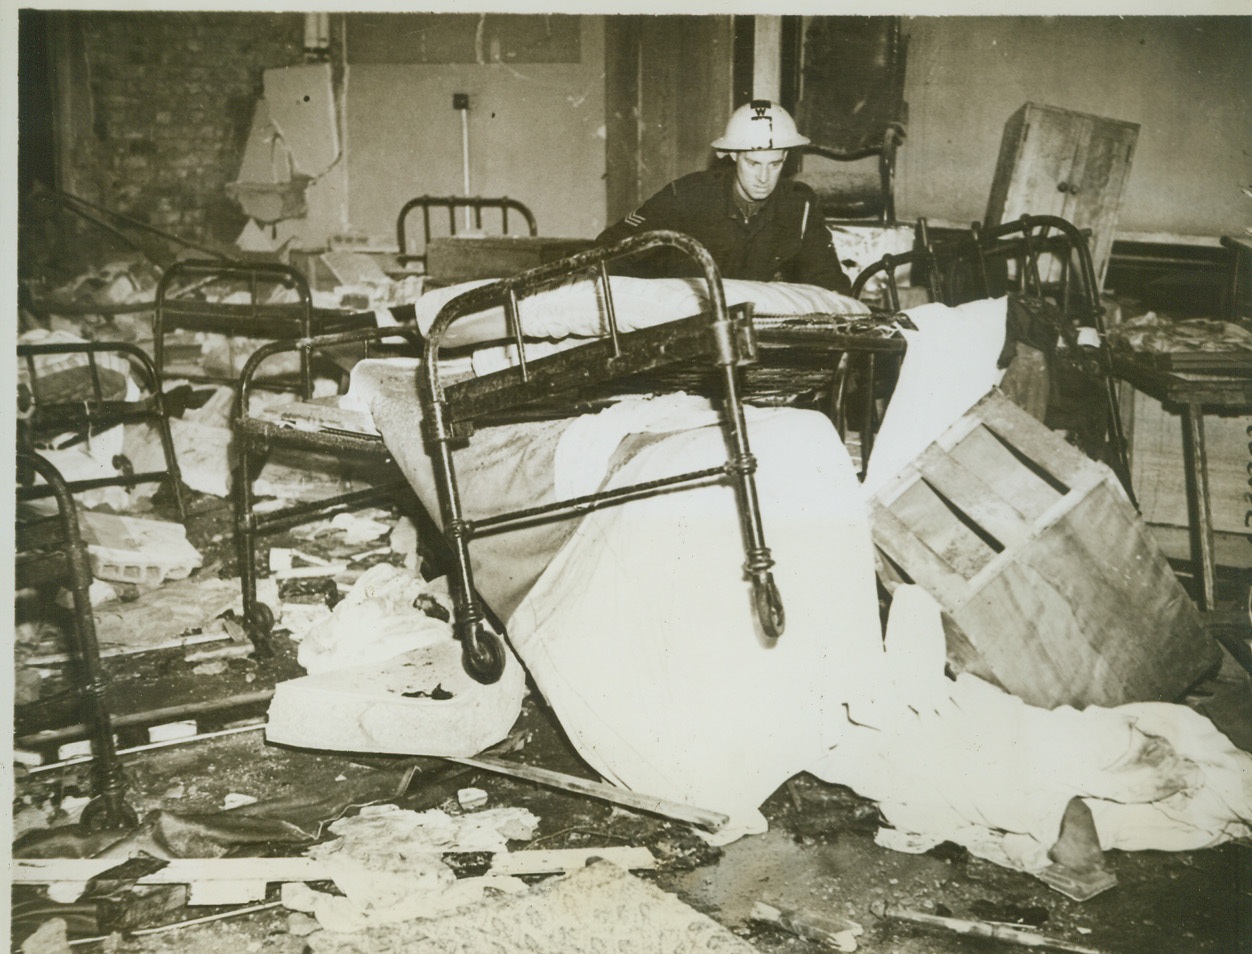 Flying Bomb Strikes Again, 7/14/1944. ENGLAND -- A British soldier looks horror-stricken at the havoc to the ward of a hospital in southern England by one of the Nazi flying bombs. These bombs, a revenge of the Nazis for the Allied invasion of their "Festung Europa", have brought many casualties to the residents of southern England, but Allied planes have been consistently attacking the launching platforms. Credit (ACME);